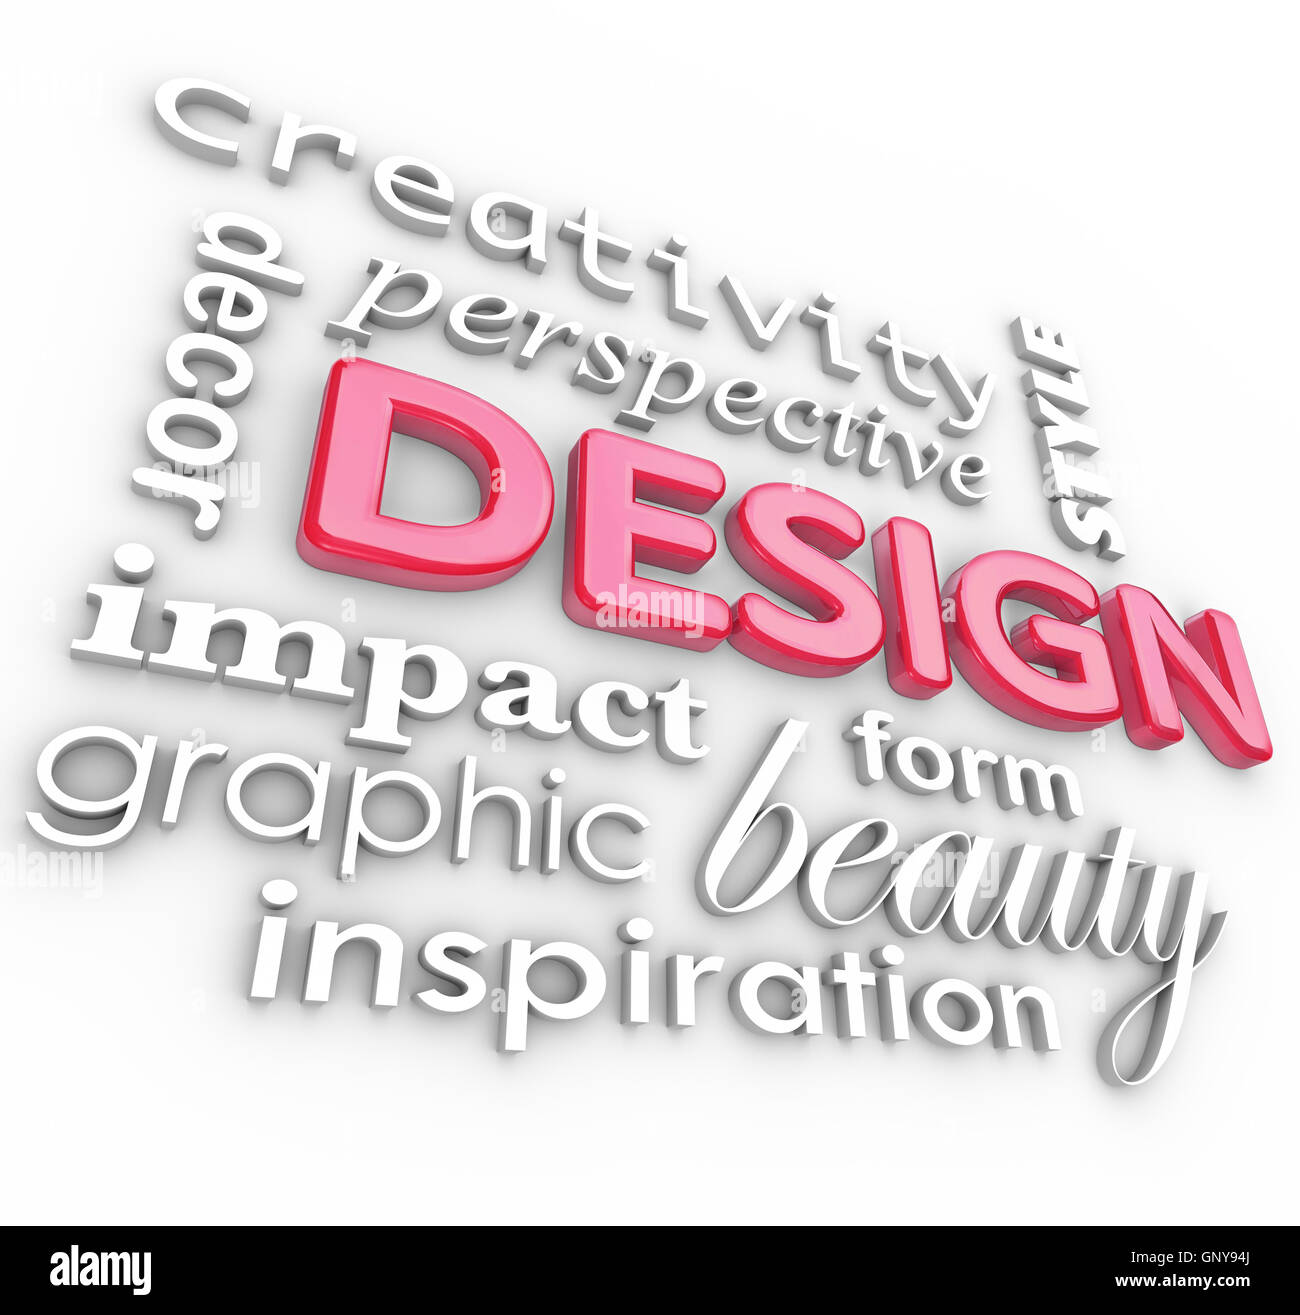 Design Words Collage Creative Perspective Style Stock Photo